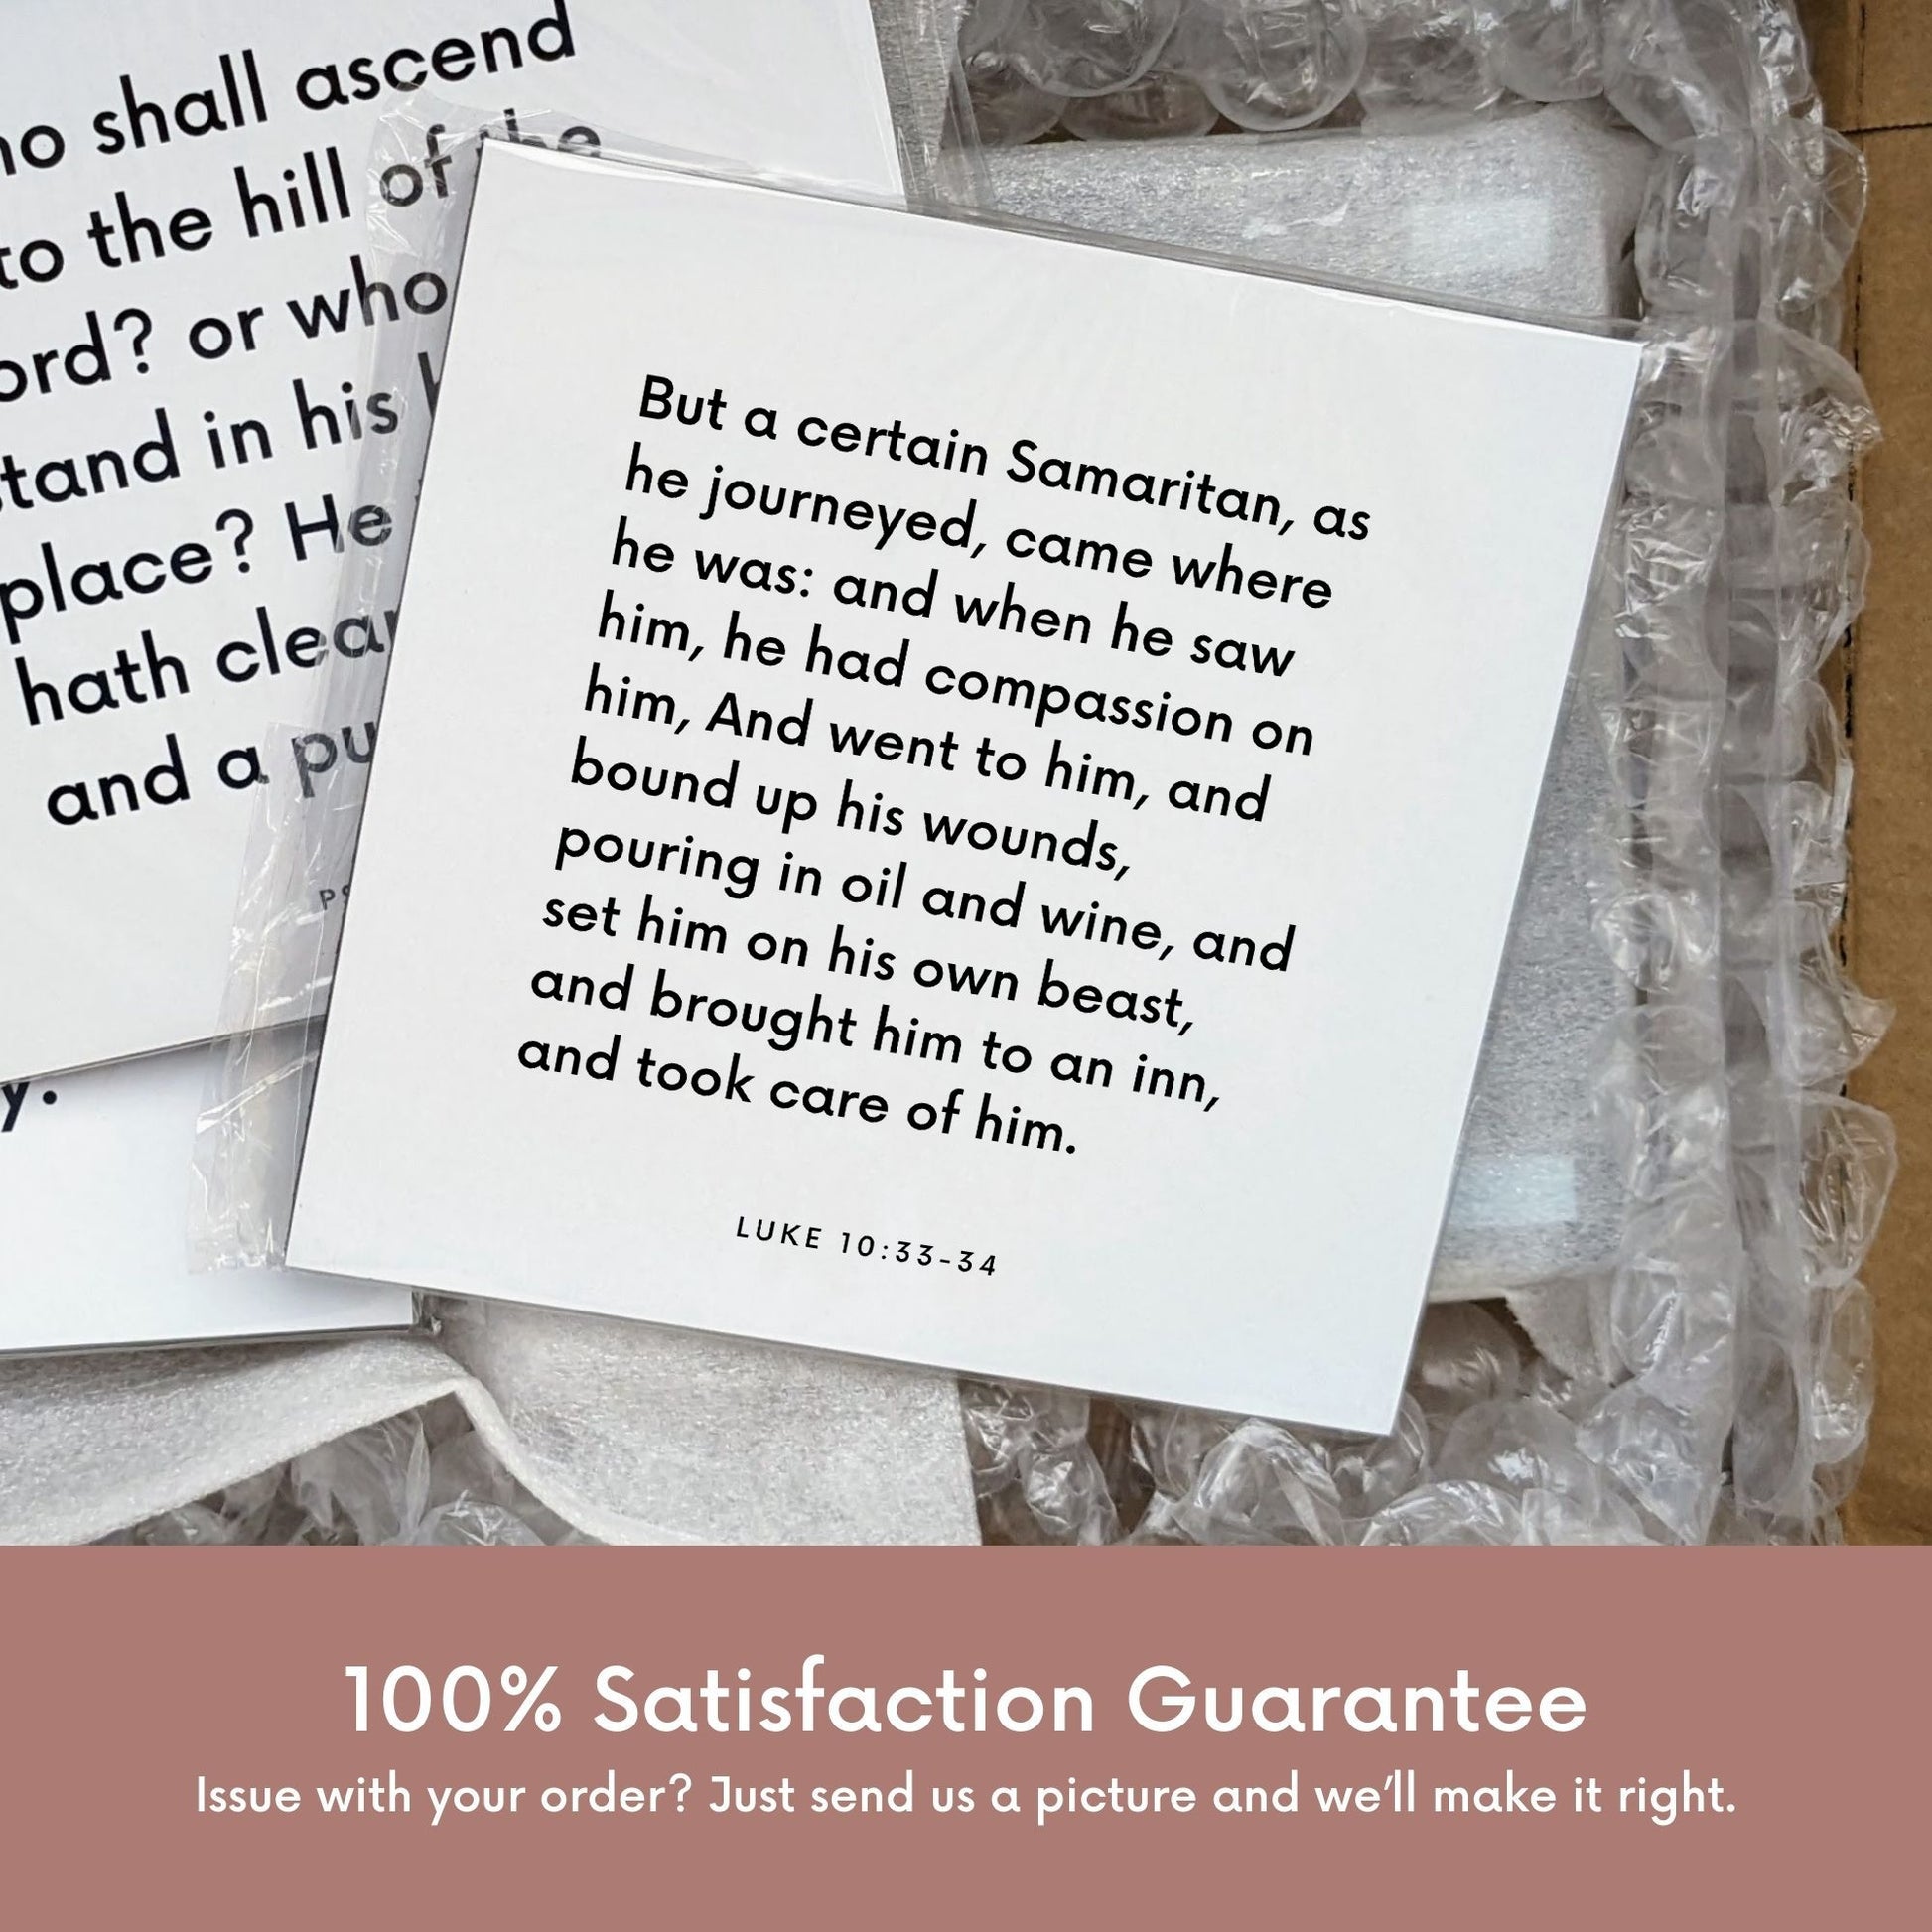 Shipping materials for scripture tile of Luke 10:33-34 - "But a certain Samaritan had compassion on him"